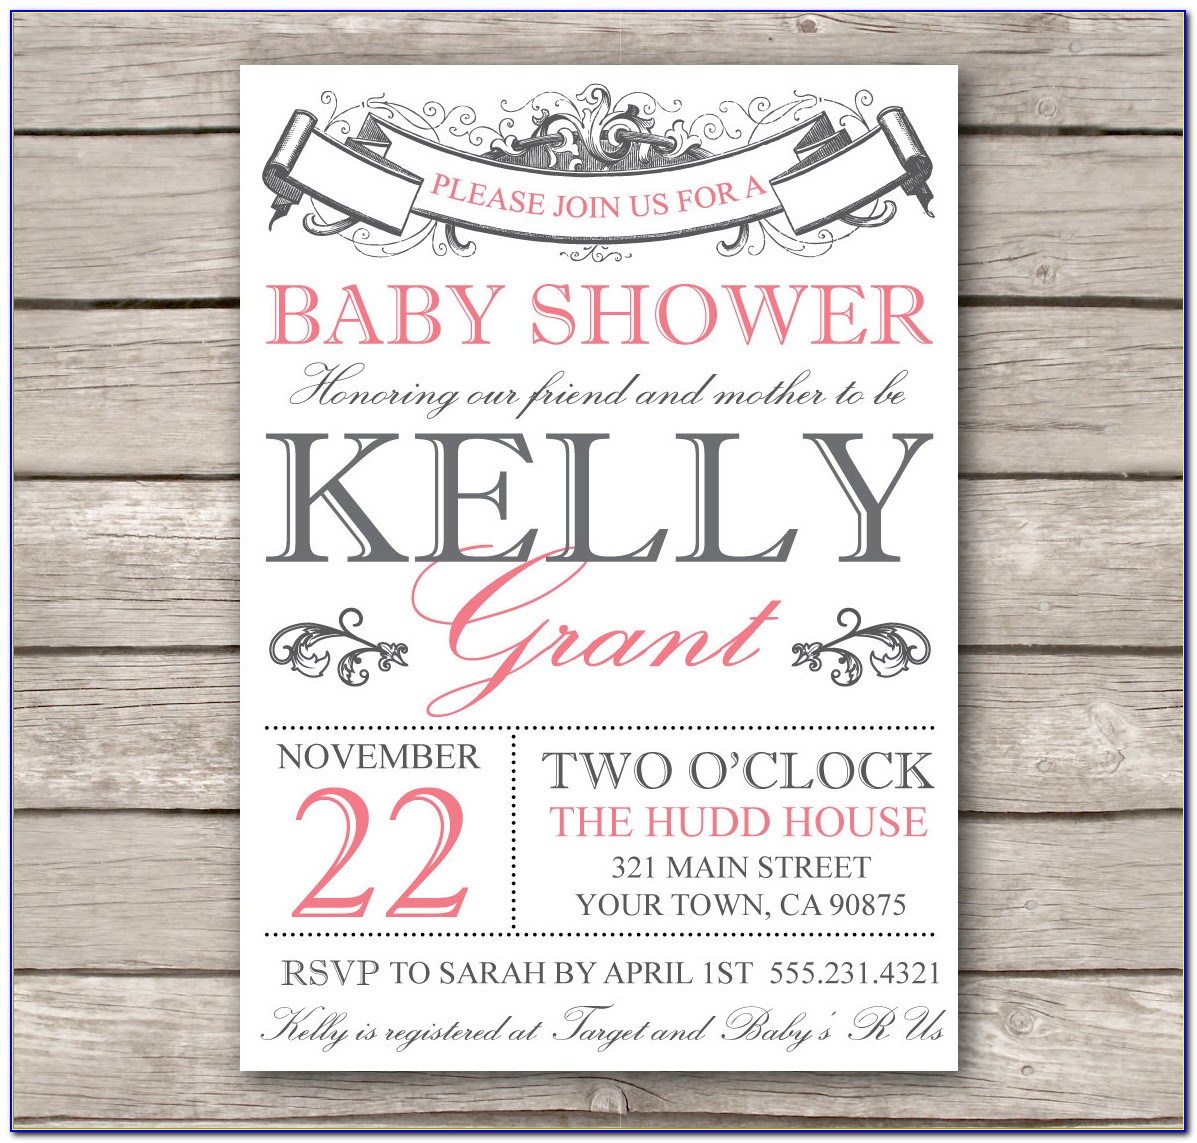 Create Electronic Baby Shower Invitations